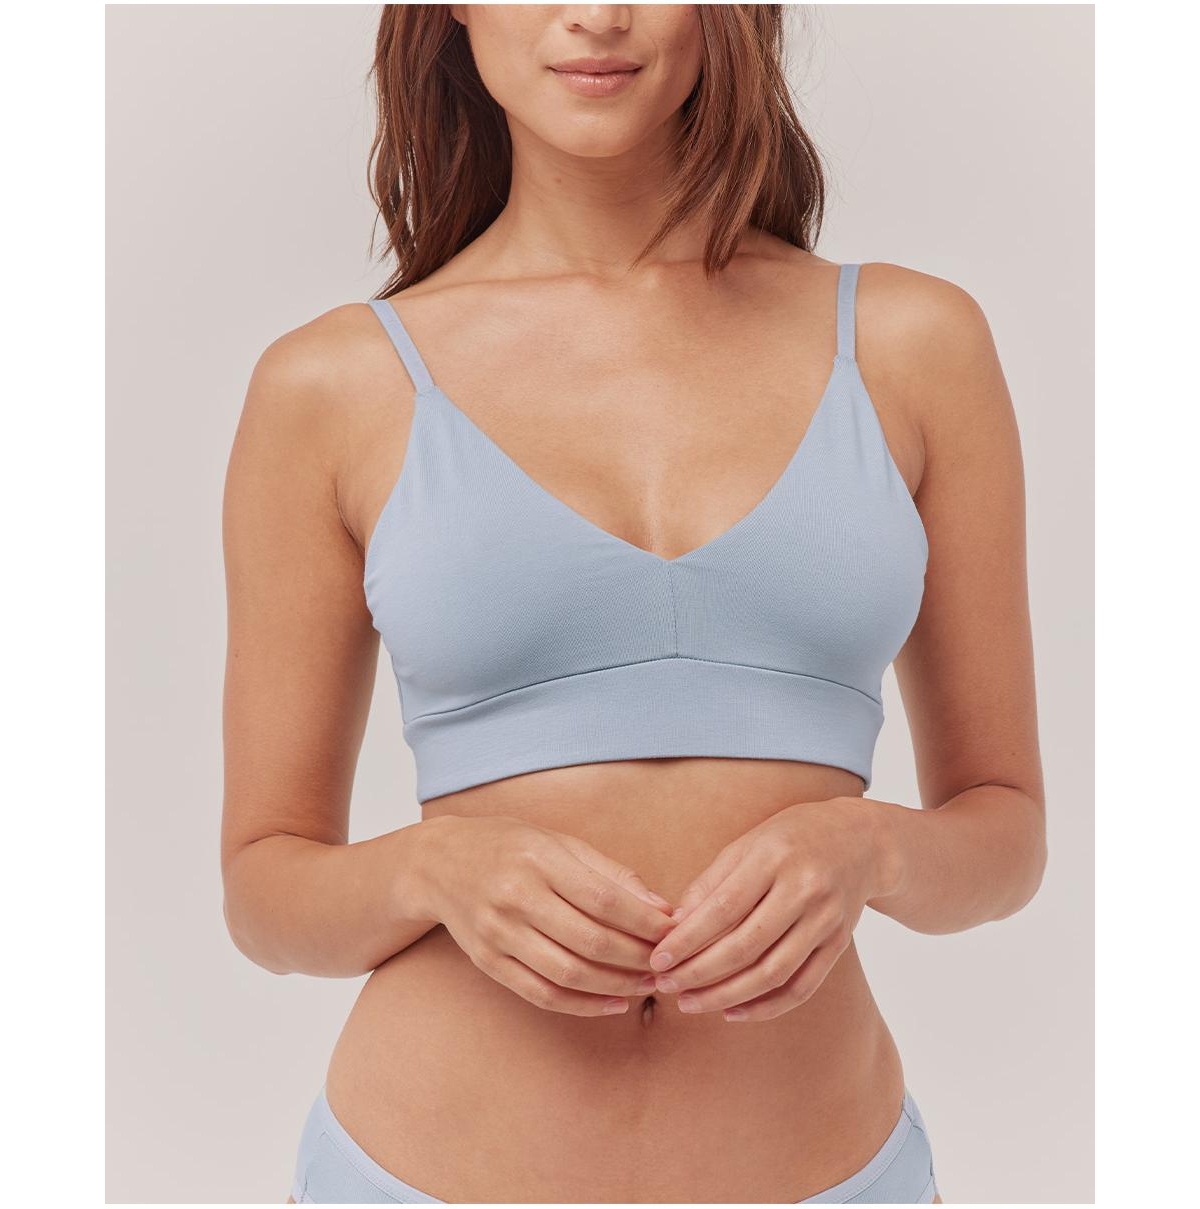 Pact Organic Cotton Everyday Classic T-shirt Bra In Periwinkle